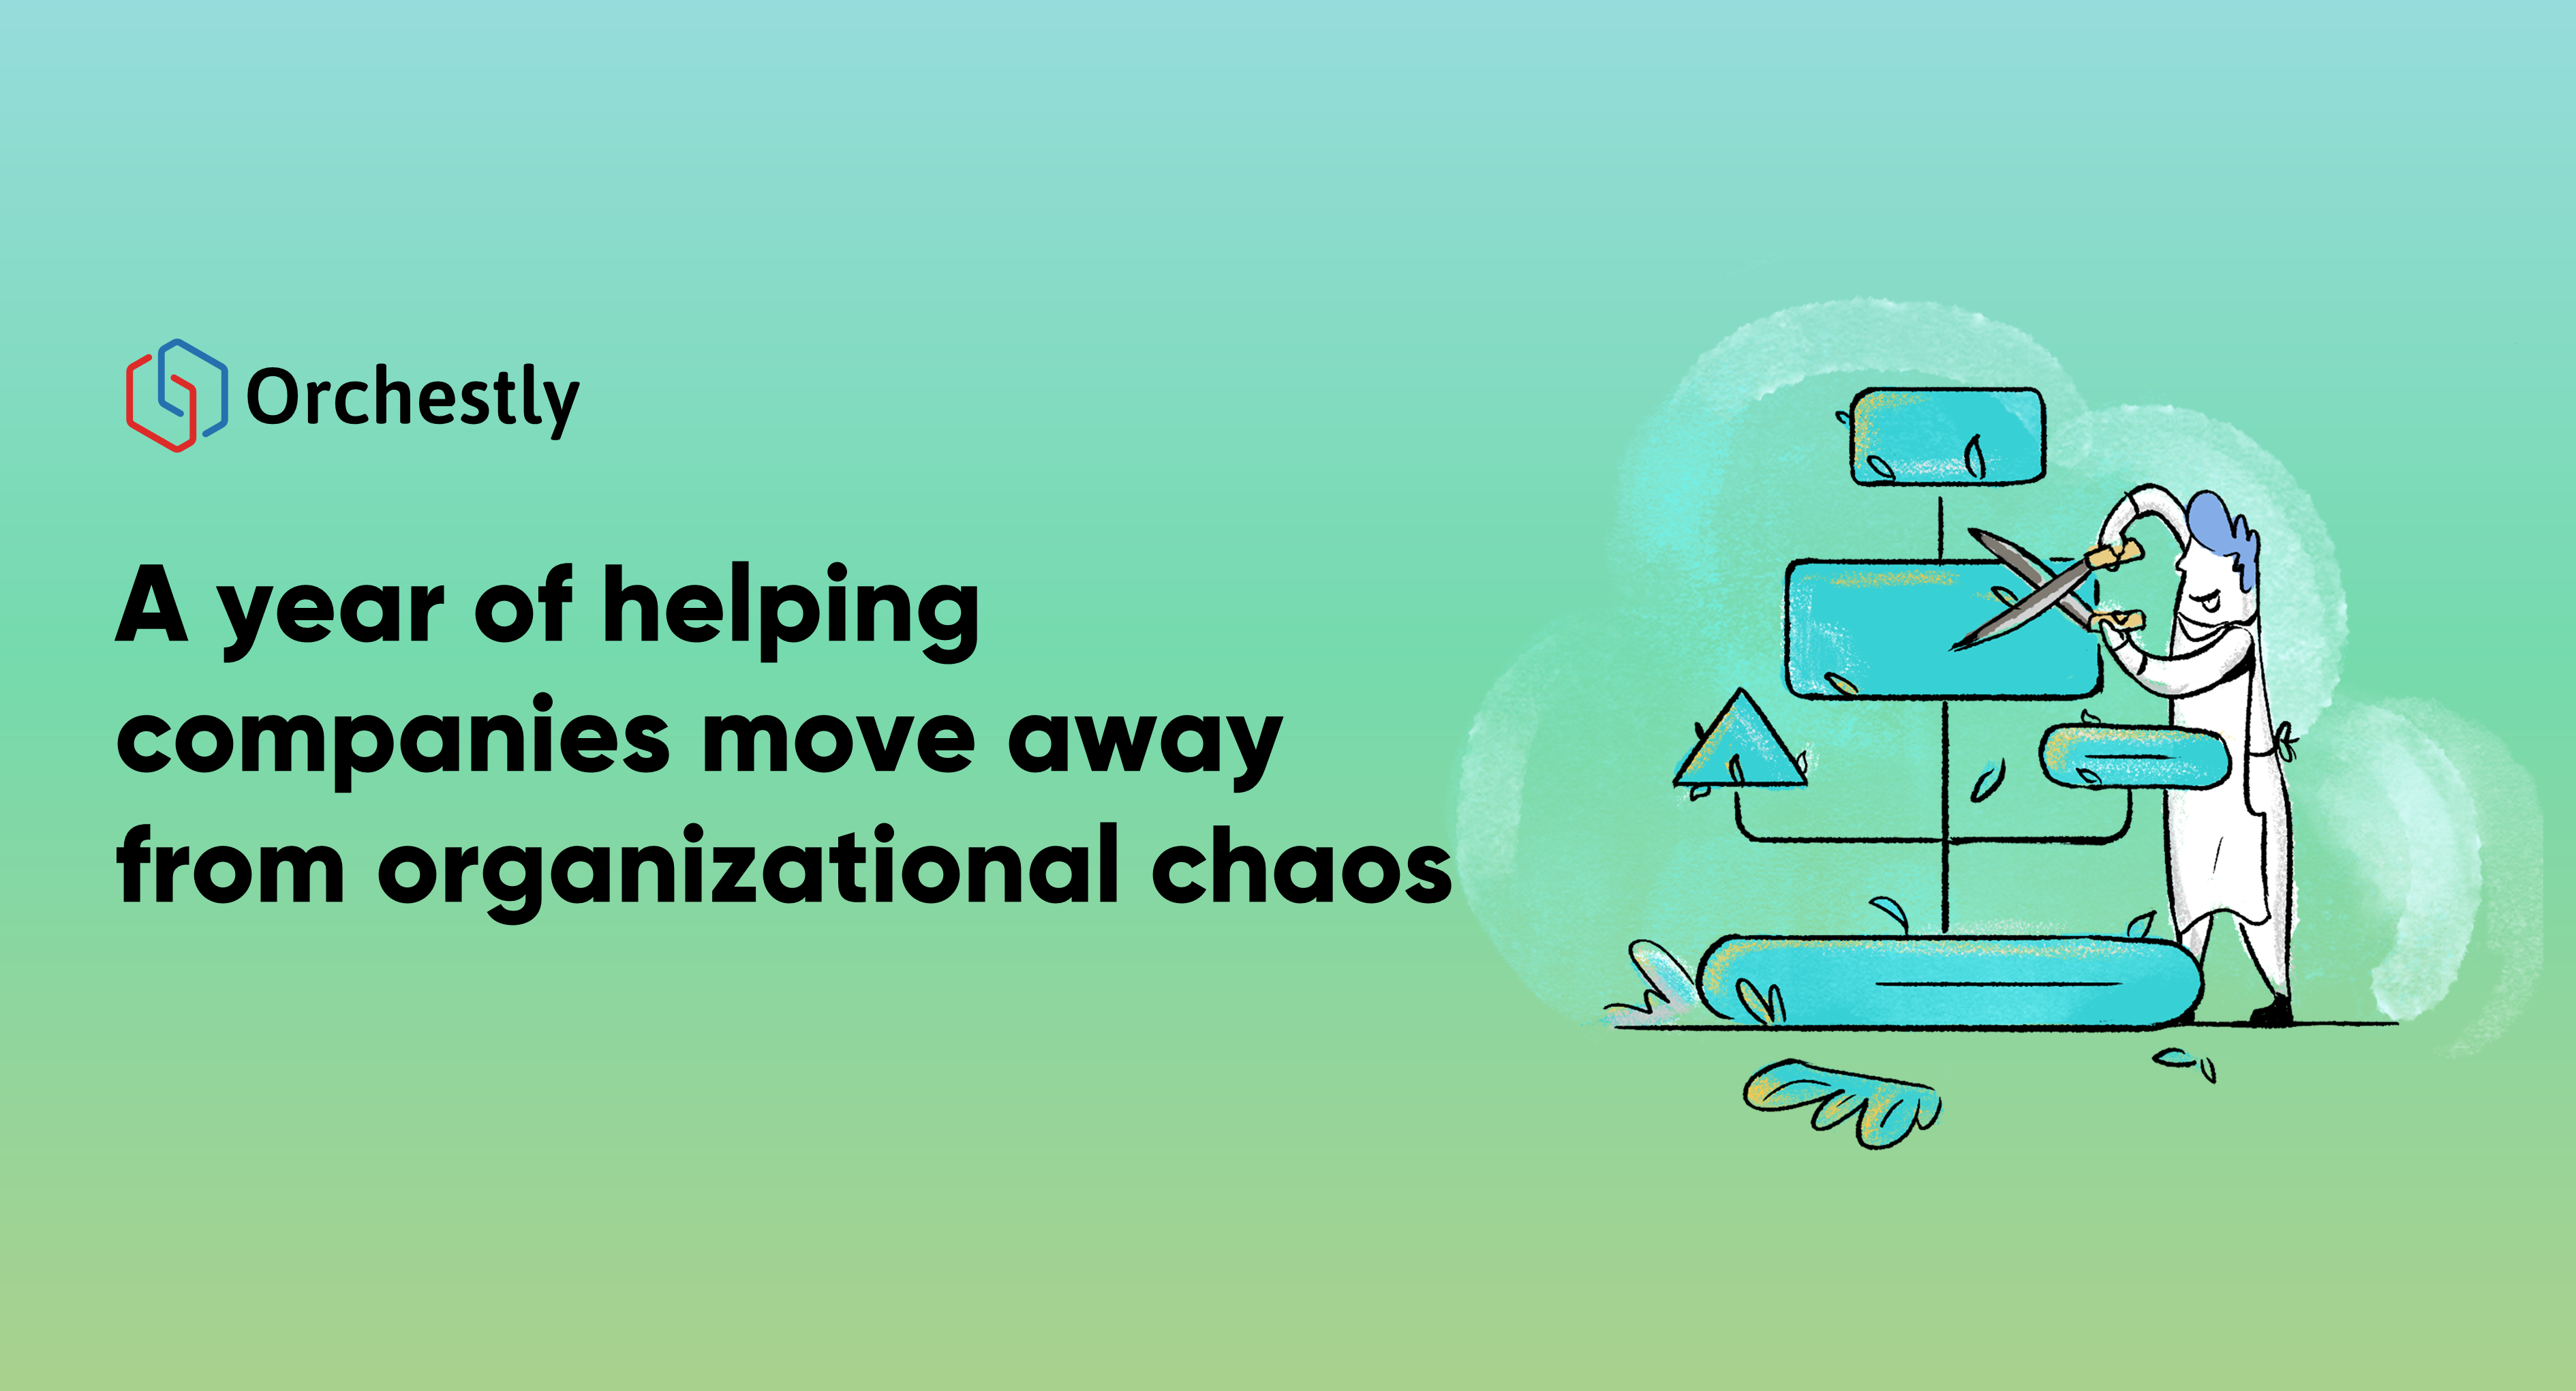 A year of helping companies move away from organizational chaos